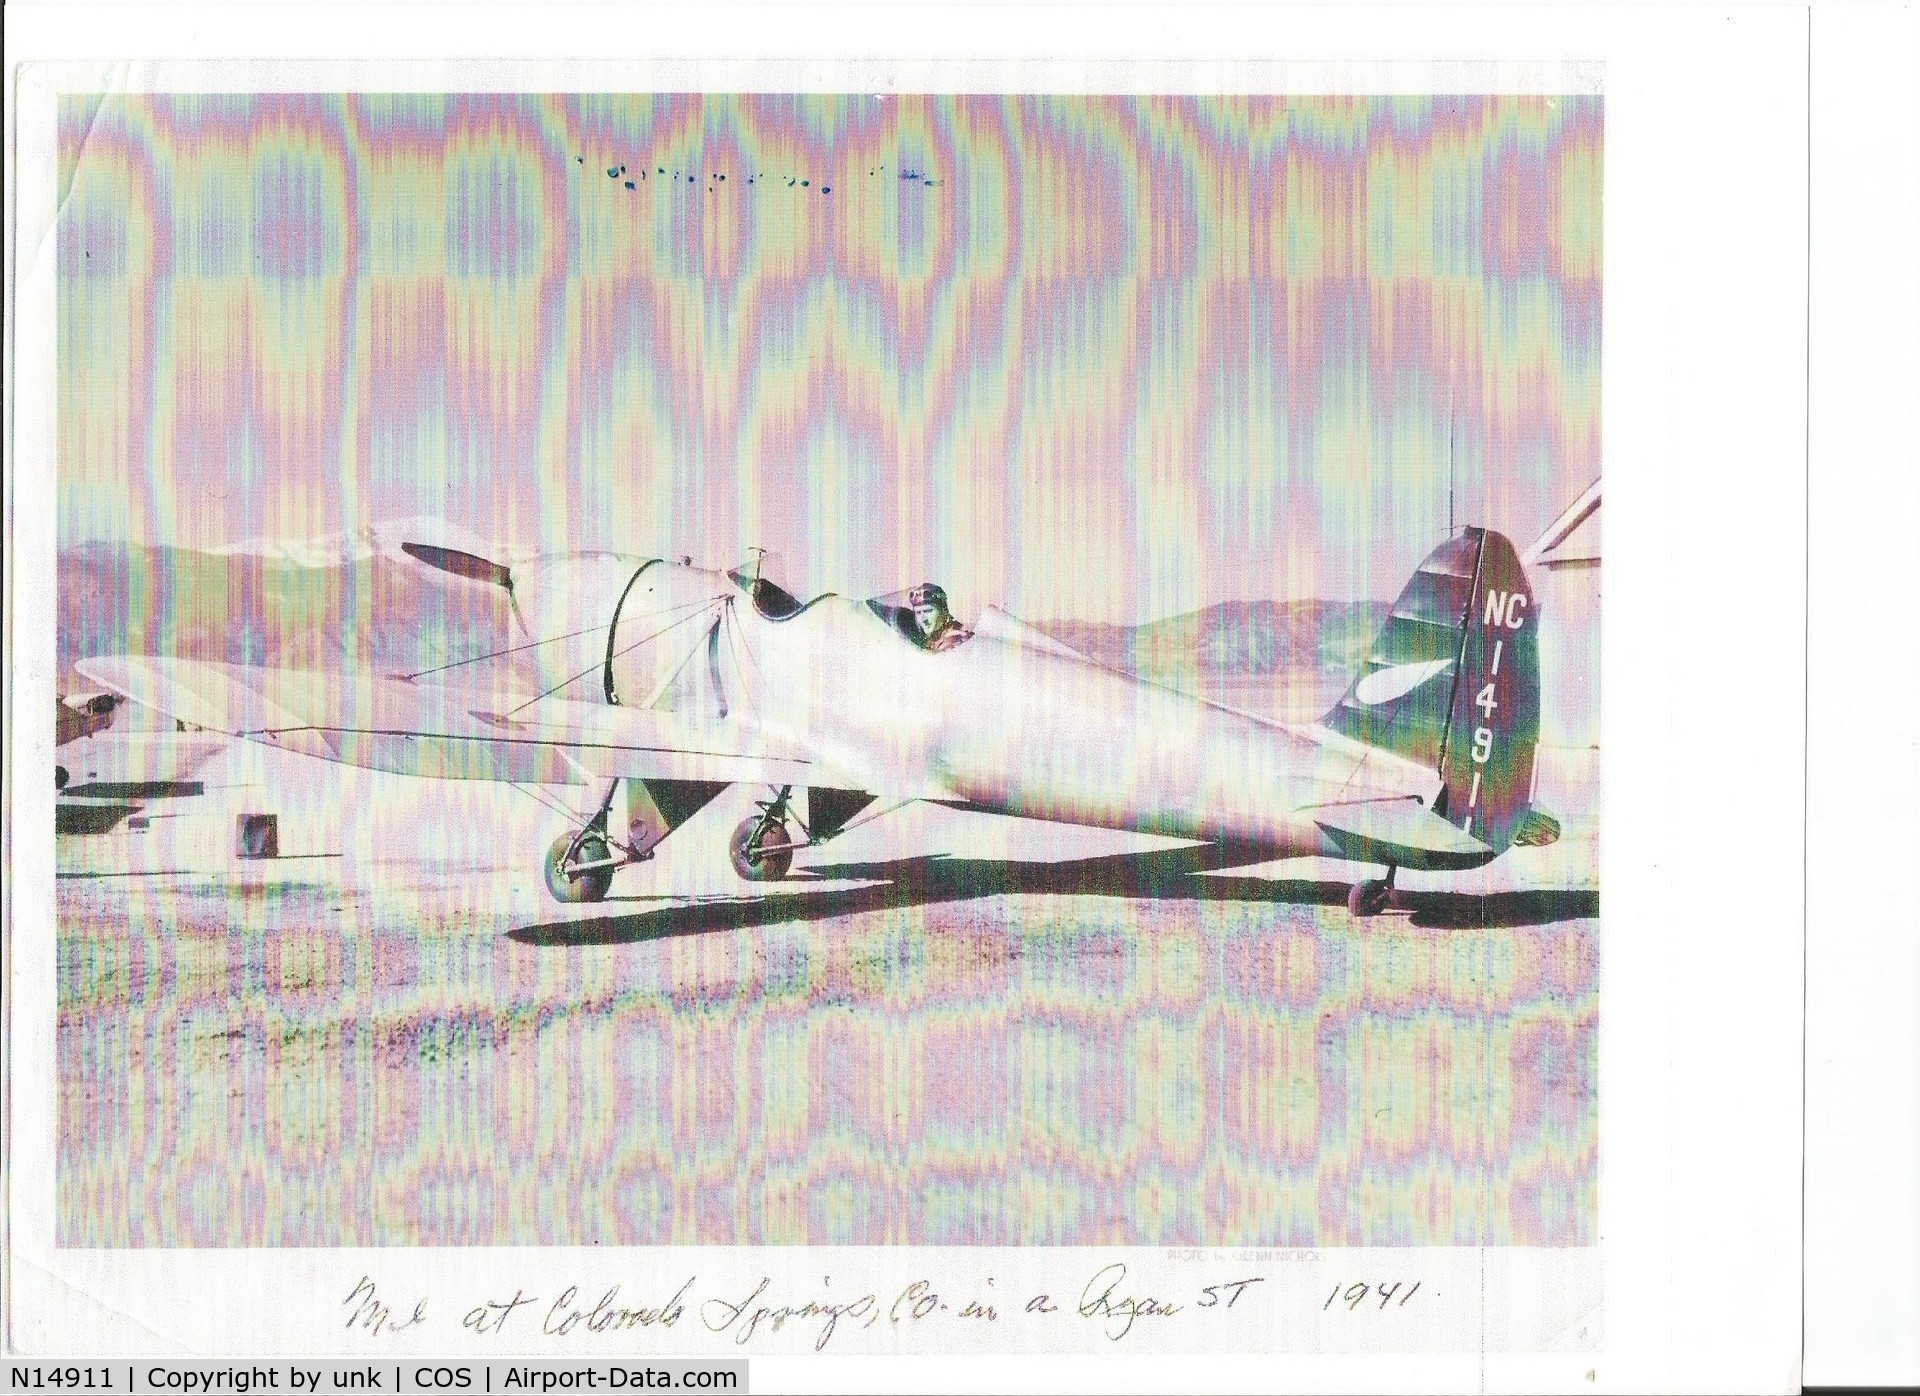 N14911, 1935 Ryan Aeronautical ST-A C/N 104, Our Dad, Paul H. Lindstrom at Colorado Springs Airport.  Later he and my mother ferried this aircraft to Washington State  right after  WWII broke out.

Copy is not the greatest as the photo I have is a copy.